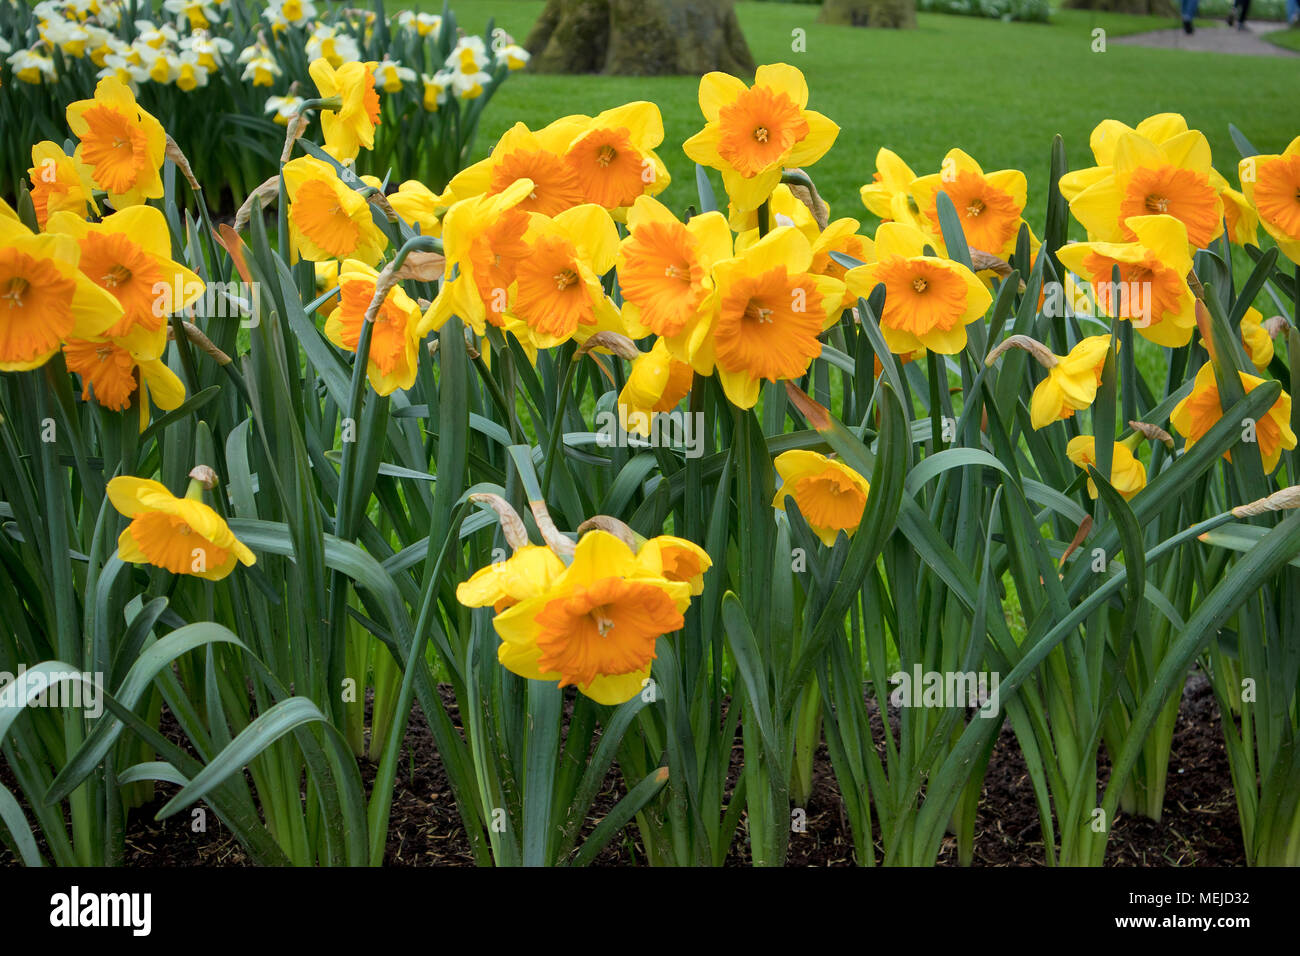 Yellow Daffodils Near A Fountain In The Background Of Trees In A